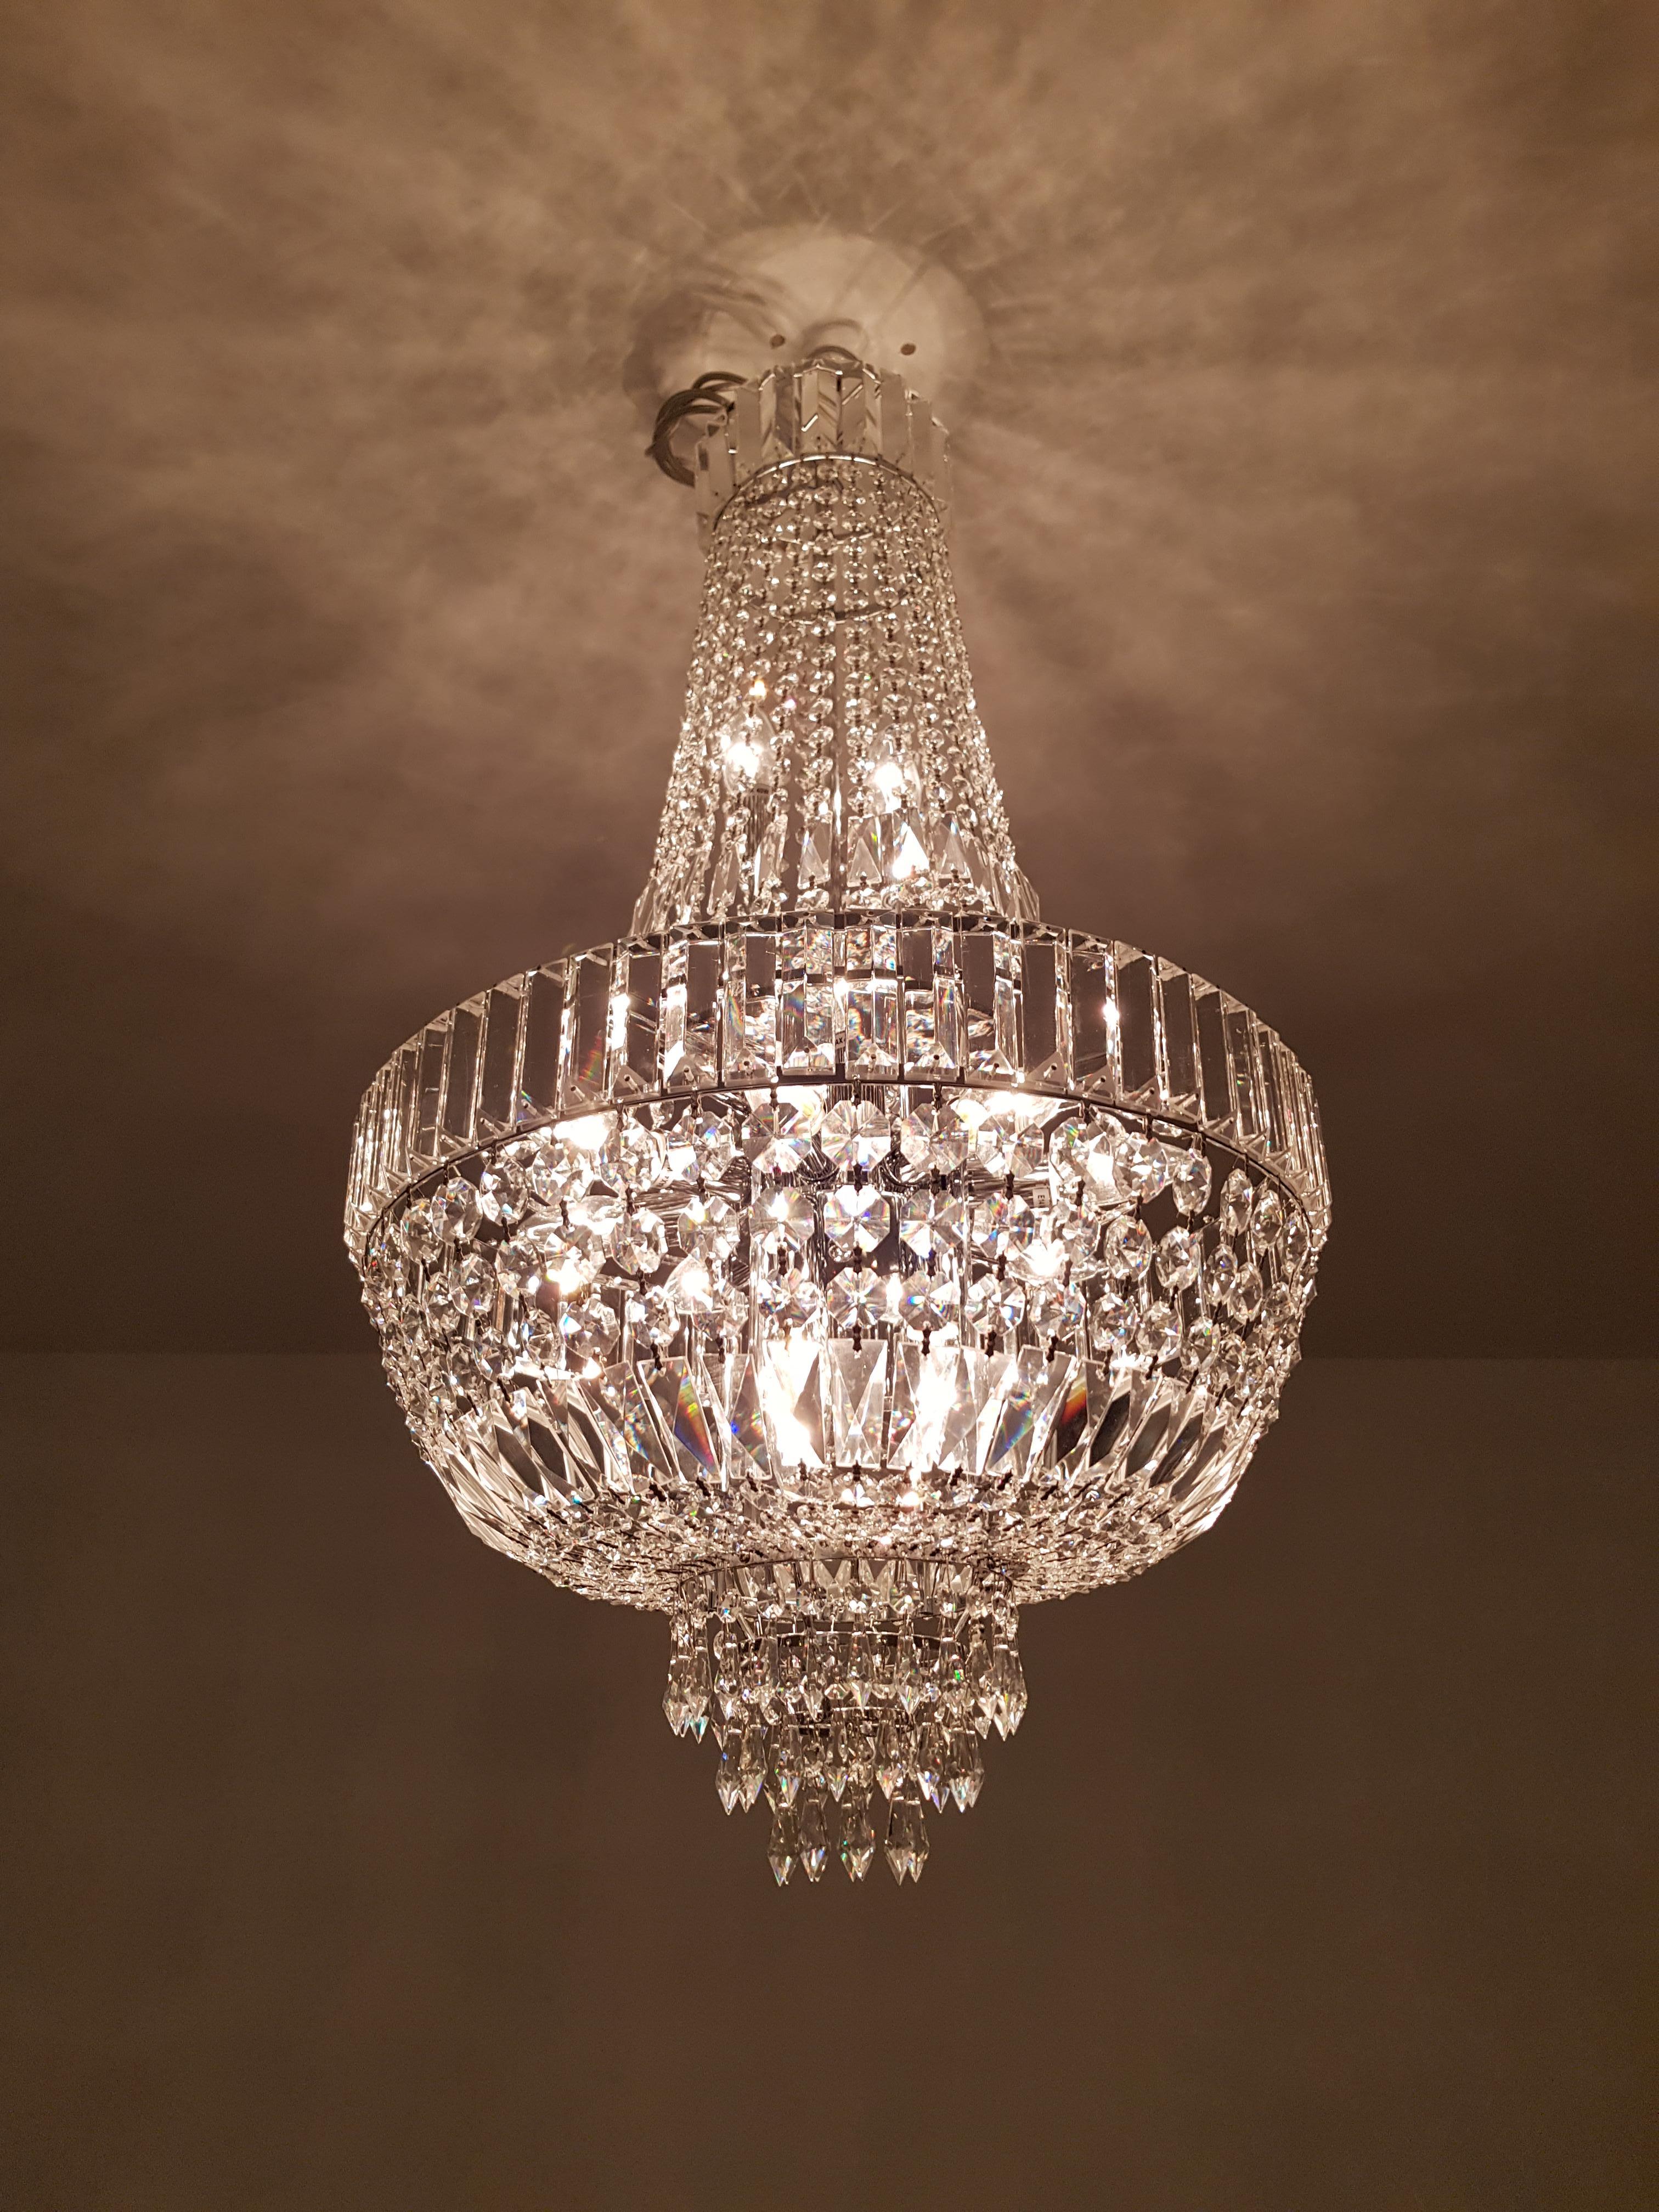 Art Deco Style Crystal Chandelier Empire Sac a Pearl Palace Lamp Chrome In New Condition For Sale In Berlin, DE